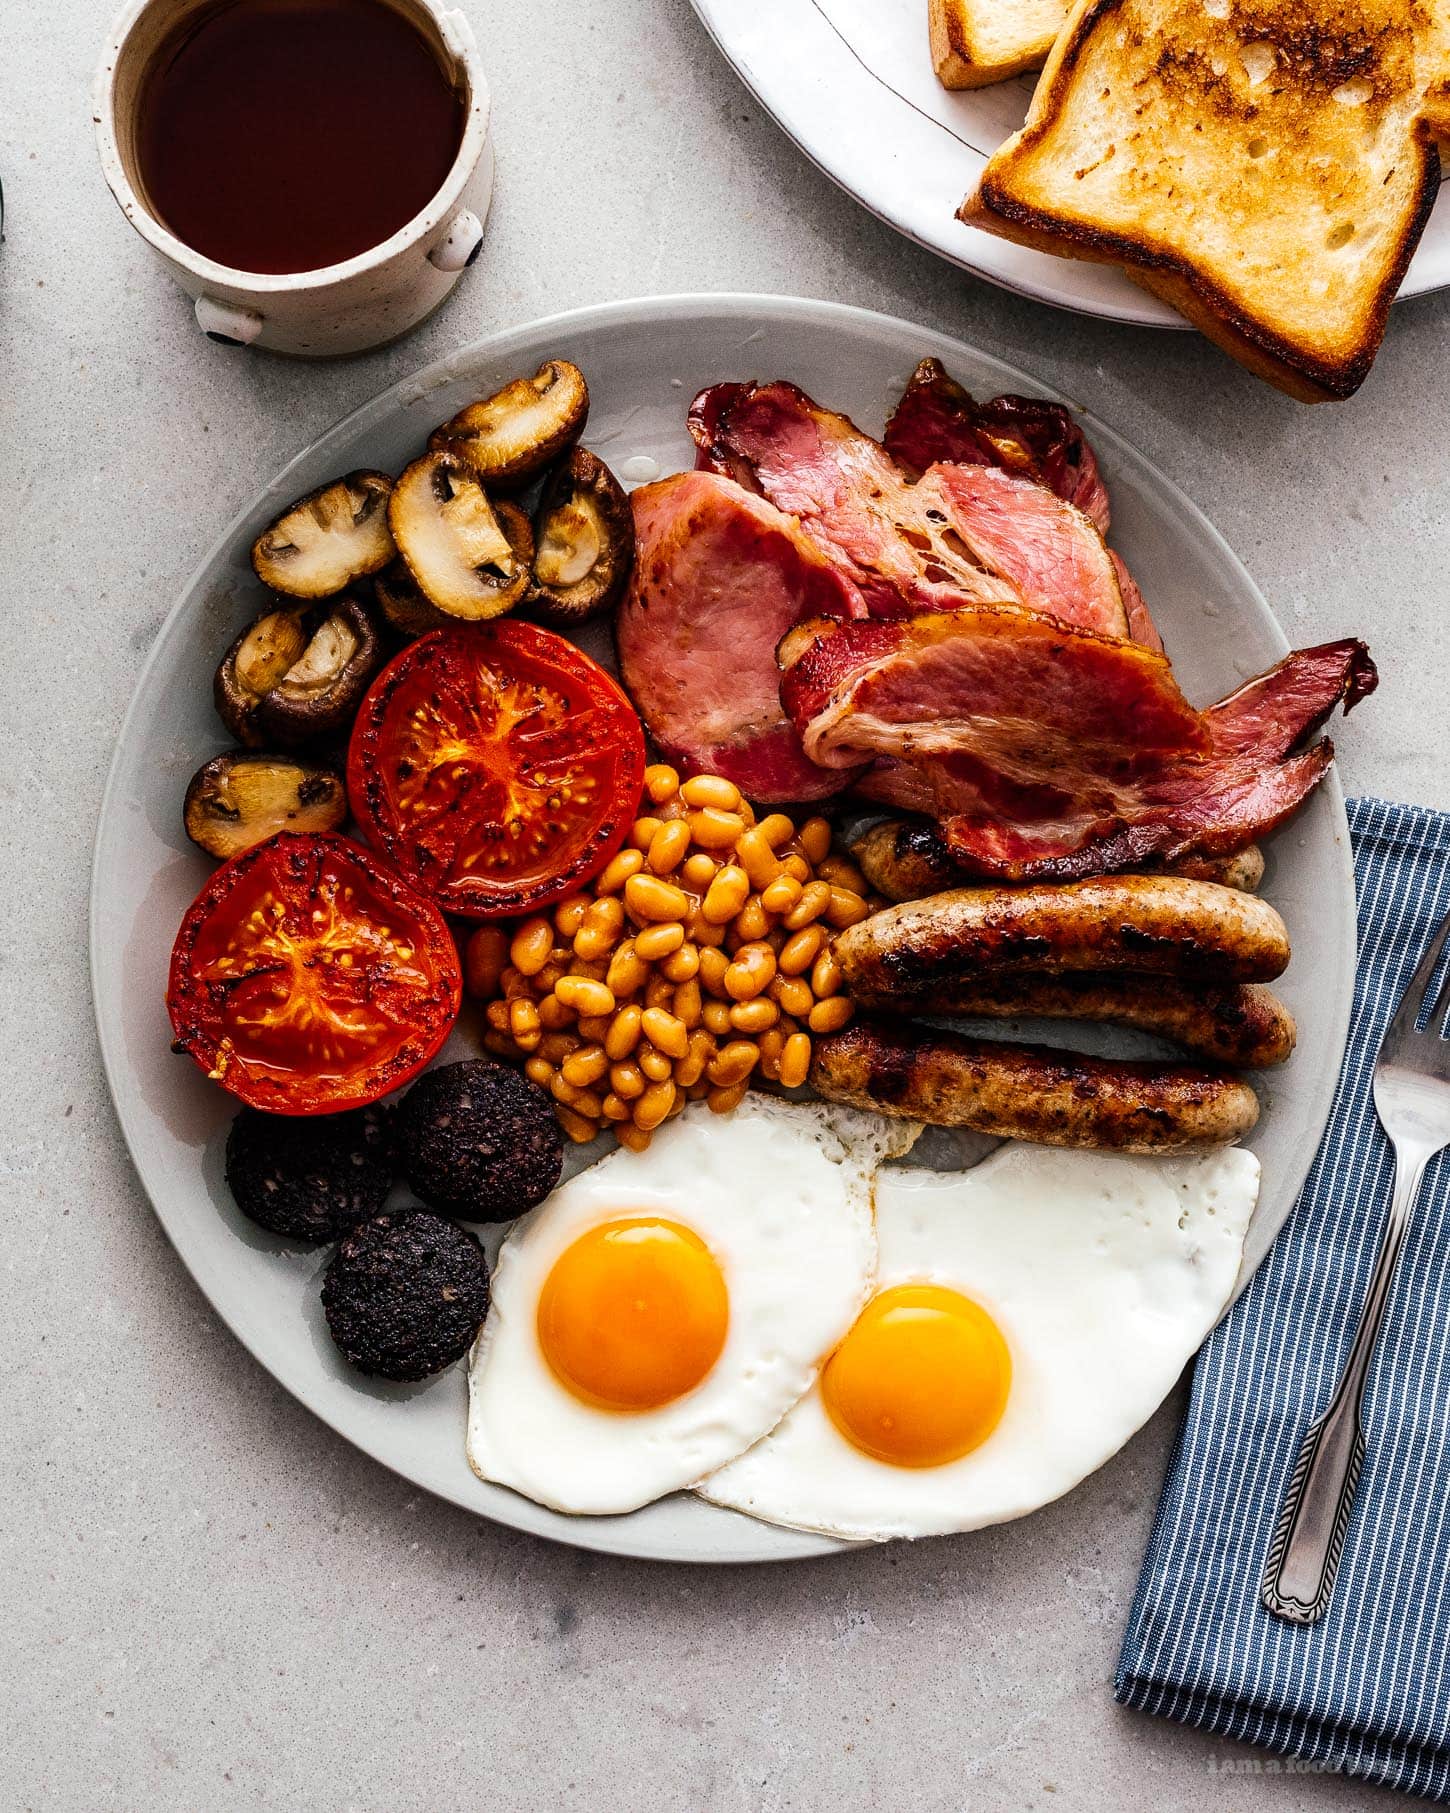 How to make a full english breakfast | sharefavoritefood.com